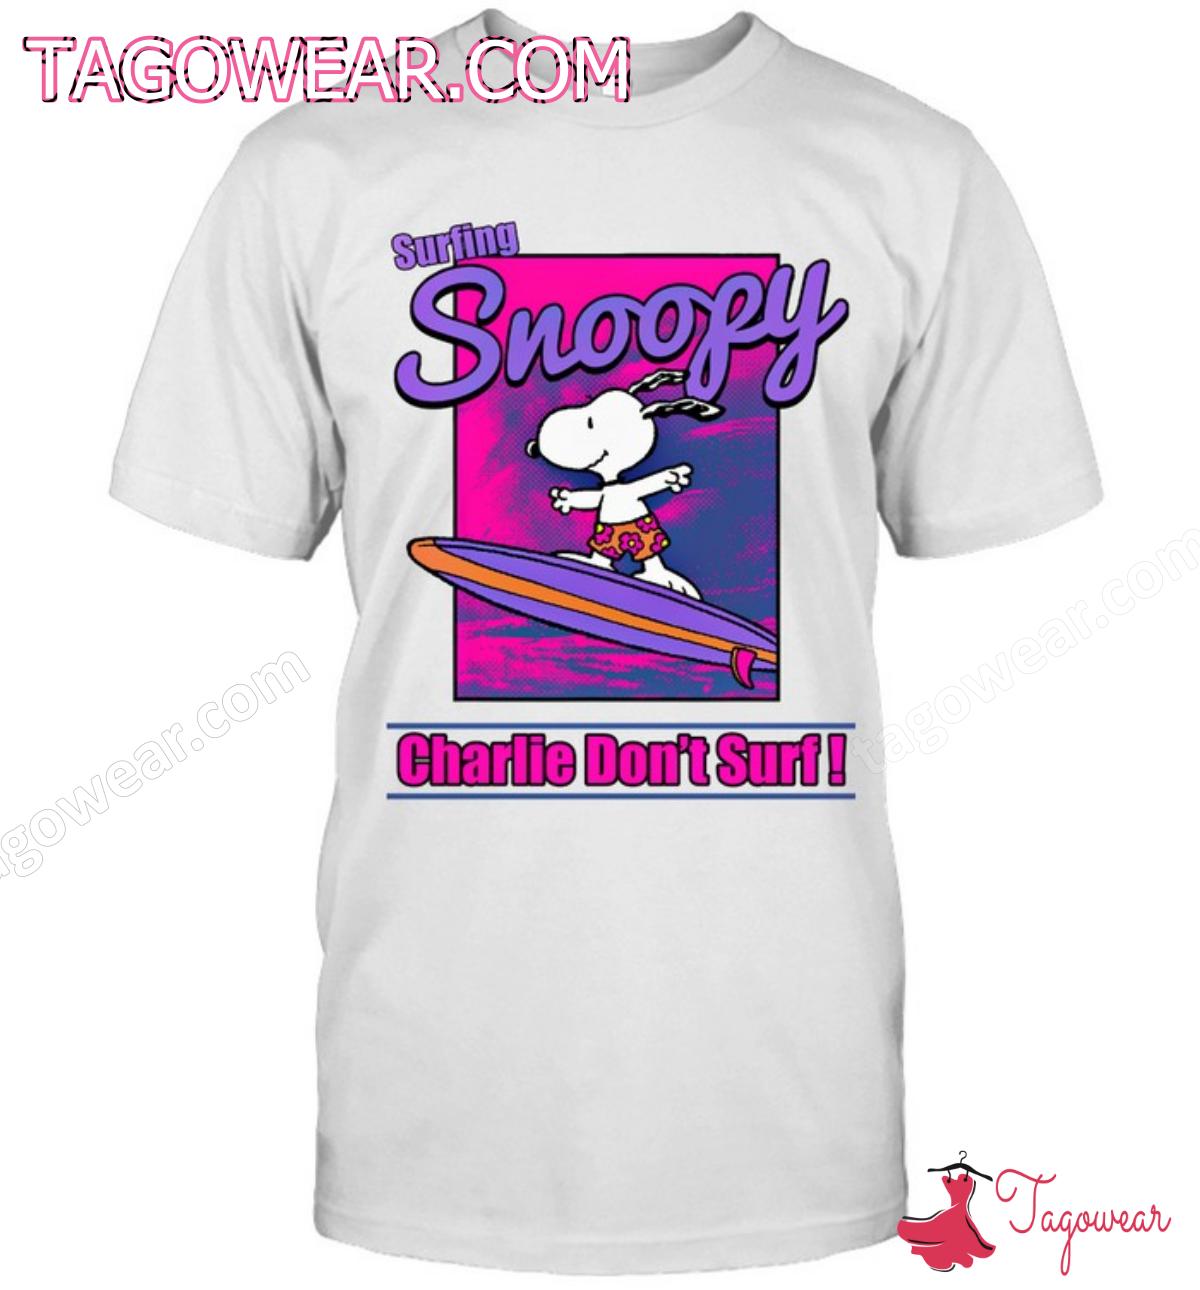 Surfing Snoopy Charlie Don't Surf Shirt